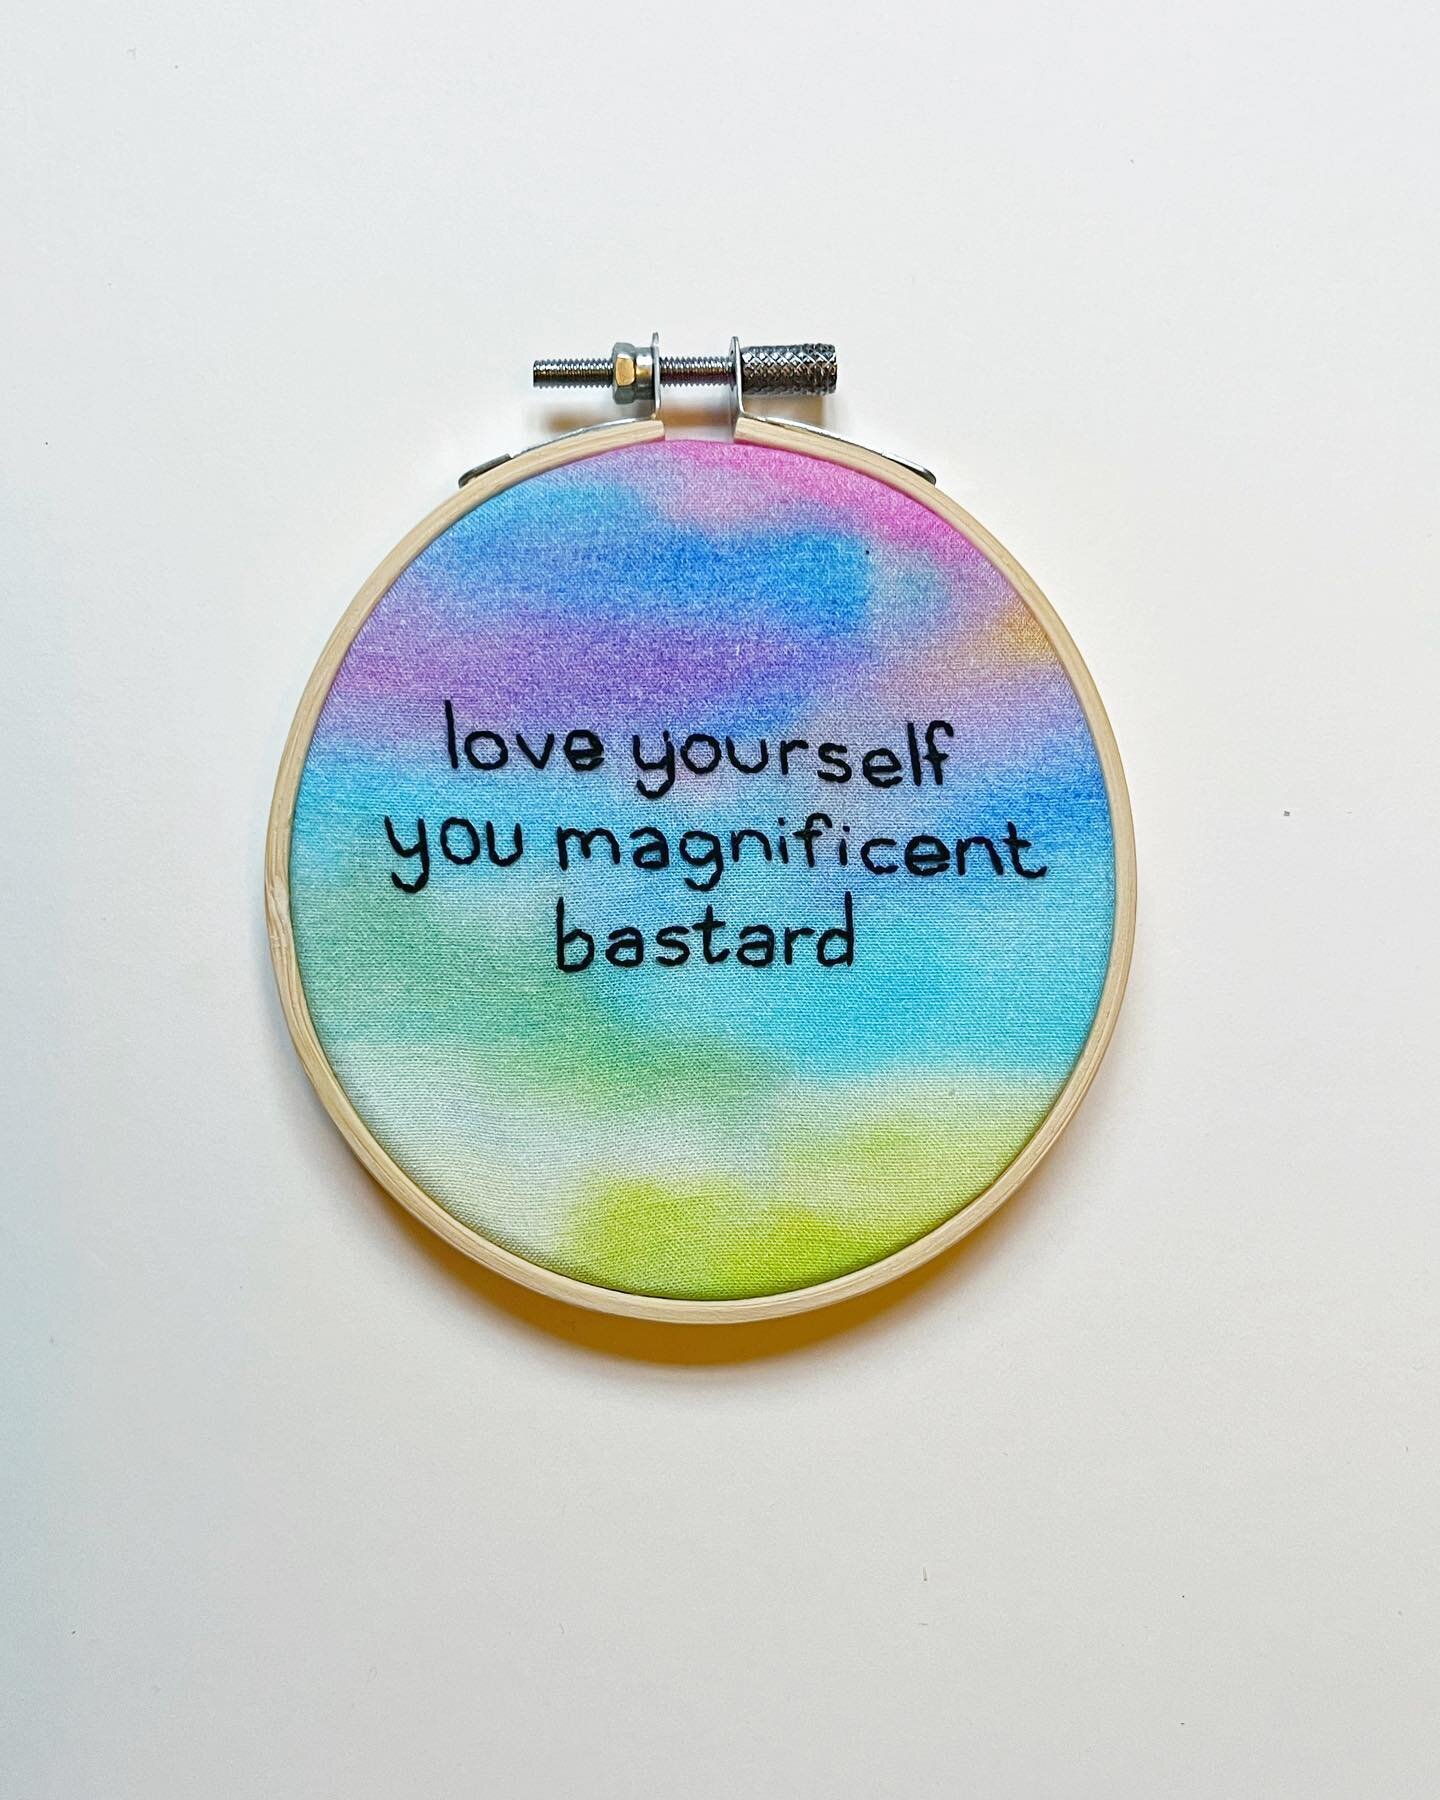 Got some more of these rainbow bebes on their way! Thanks to @twig_and_antler for suggesting this PERFECT phrasing 😍